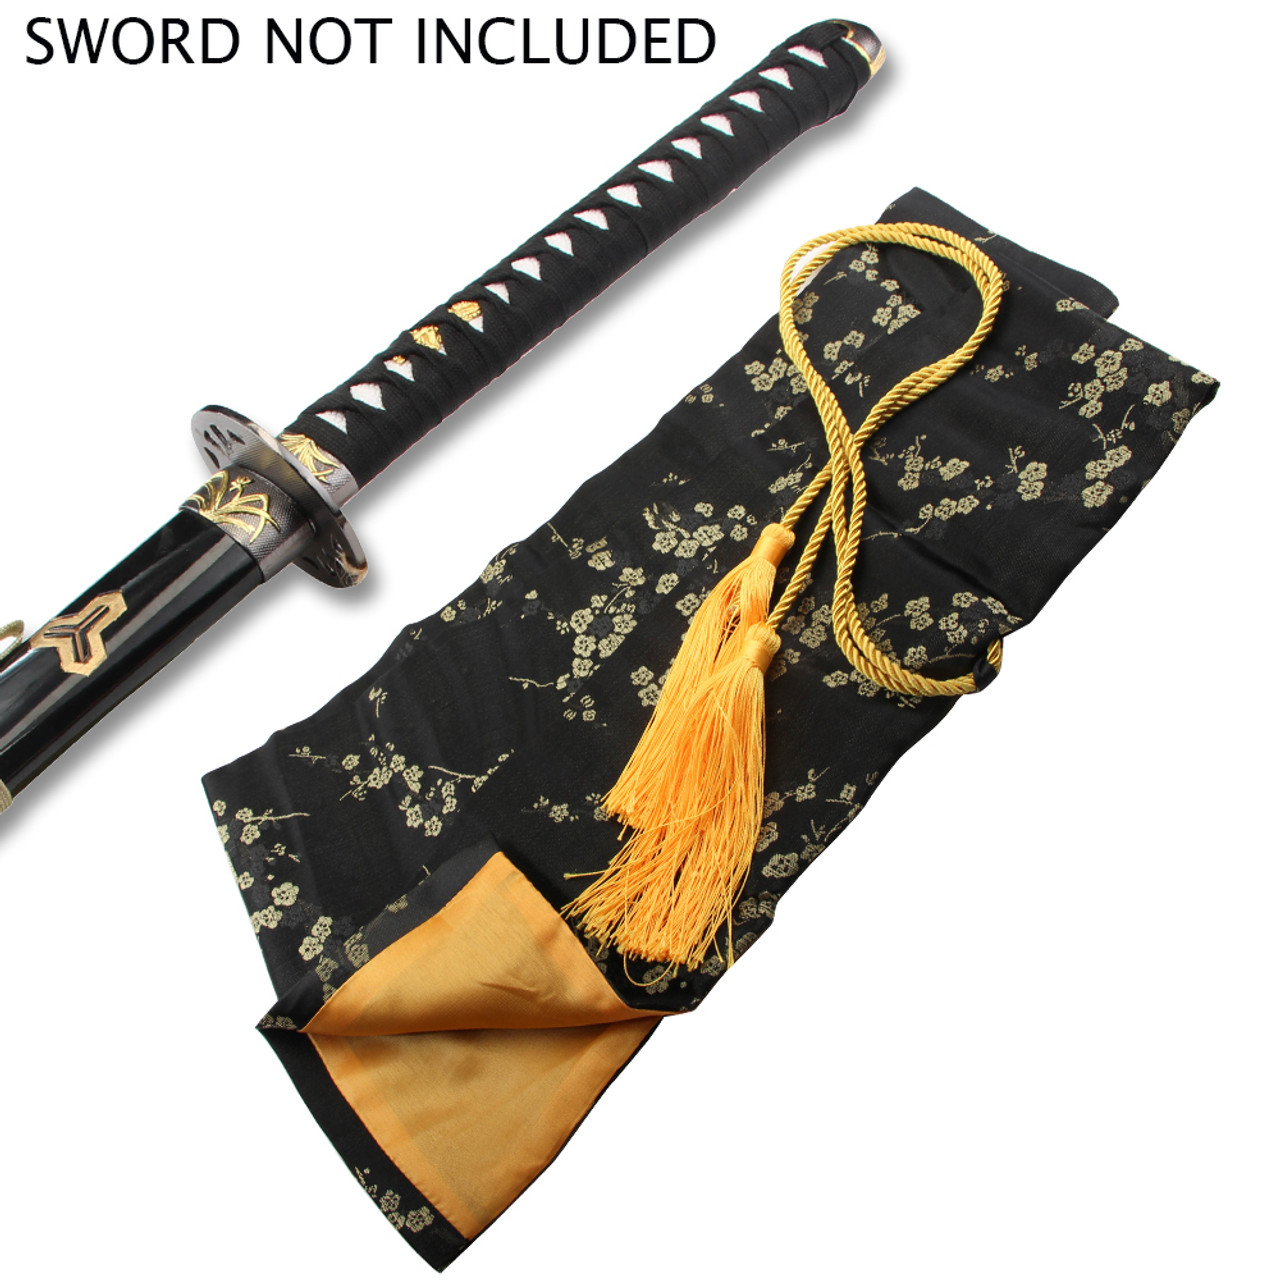 BLACK SILK EMBROIDERED SWORD BAG WITH GOLD ROPE TIE - Edge Import